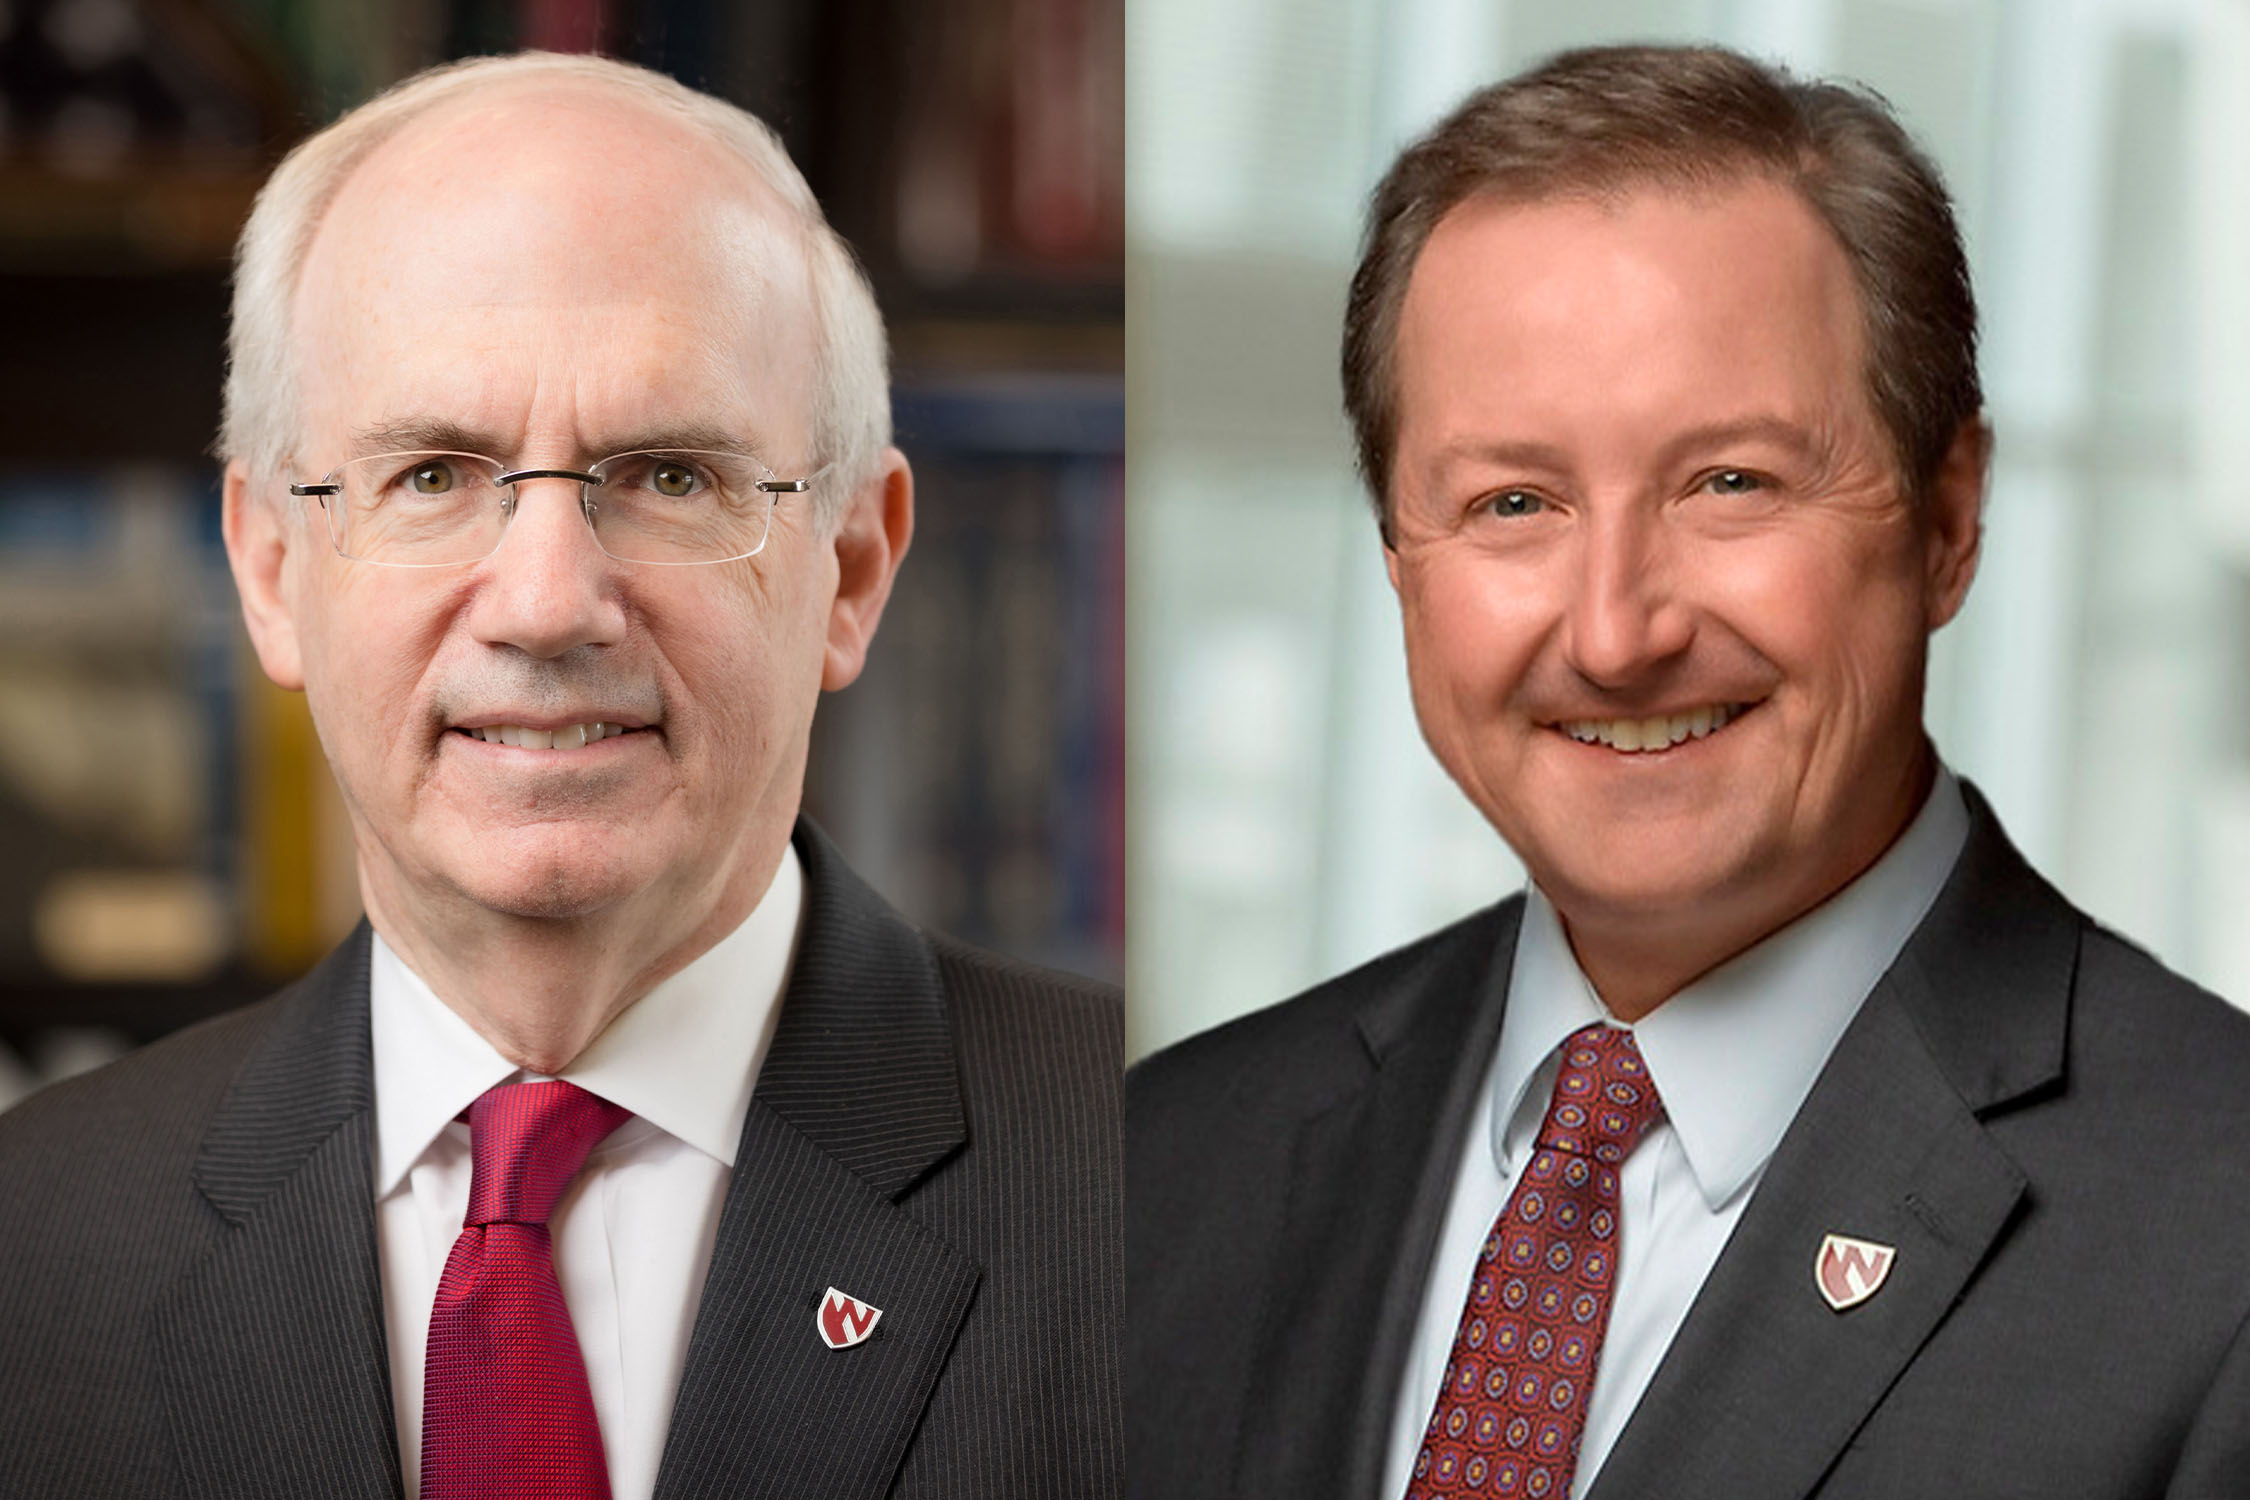 UNMC Chancellor Jeffrey P&period; Gold&comma; MD&comma; and Chris Kratochvil&comma; MD&comma; UNMC’s vice chancellor for external relations